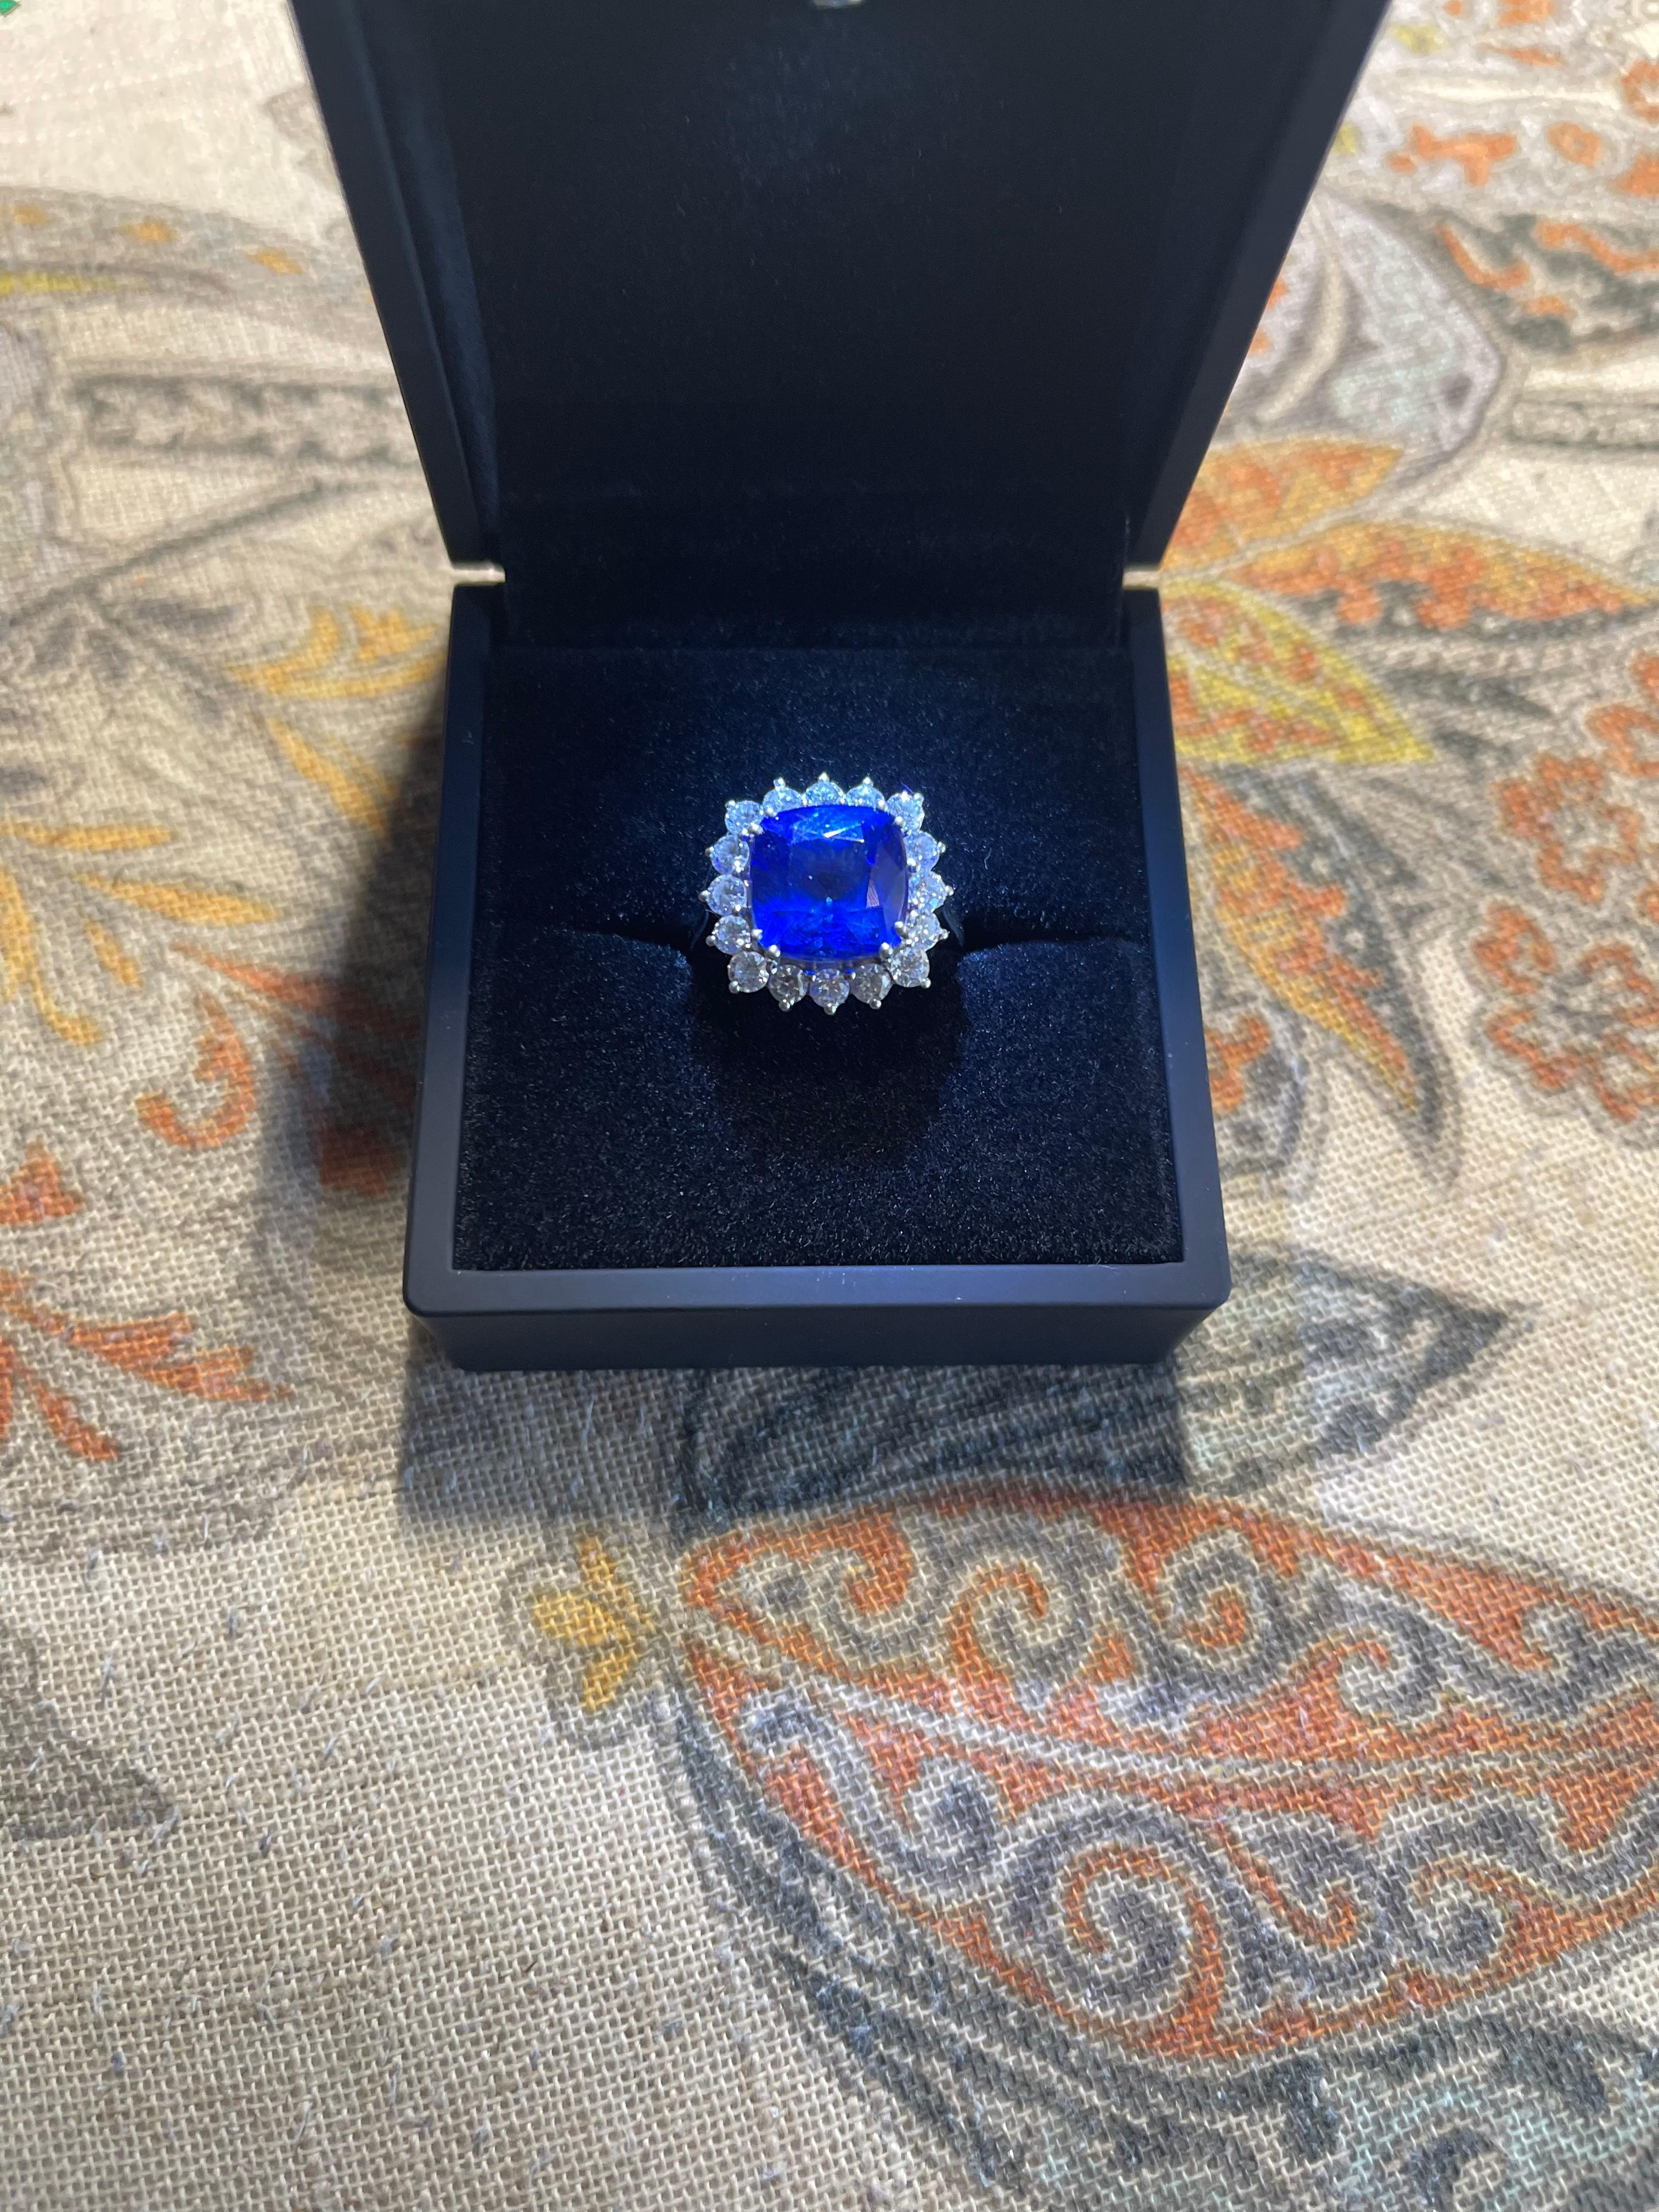 This ring is a stunning example of the best Tanzanite the mines ever produced.  This stunner is set in platinum with a 9.00 ctw Vivid/AAAA/Block D cushion cut Tanzanite with rich blues and purples and 16 sparkling diamonds (1.40 ctw) with E/F color